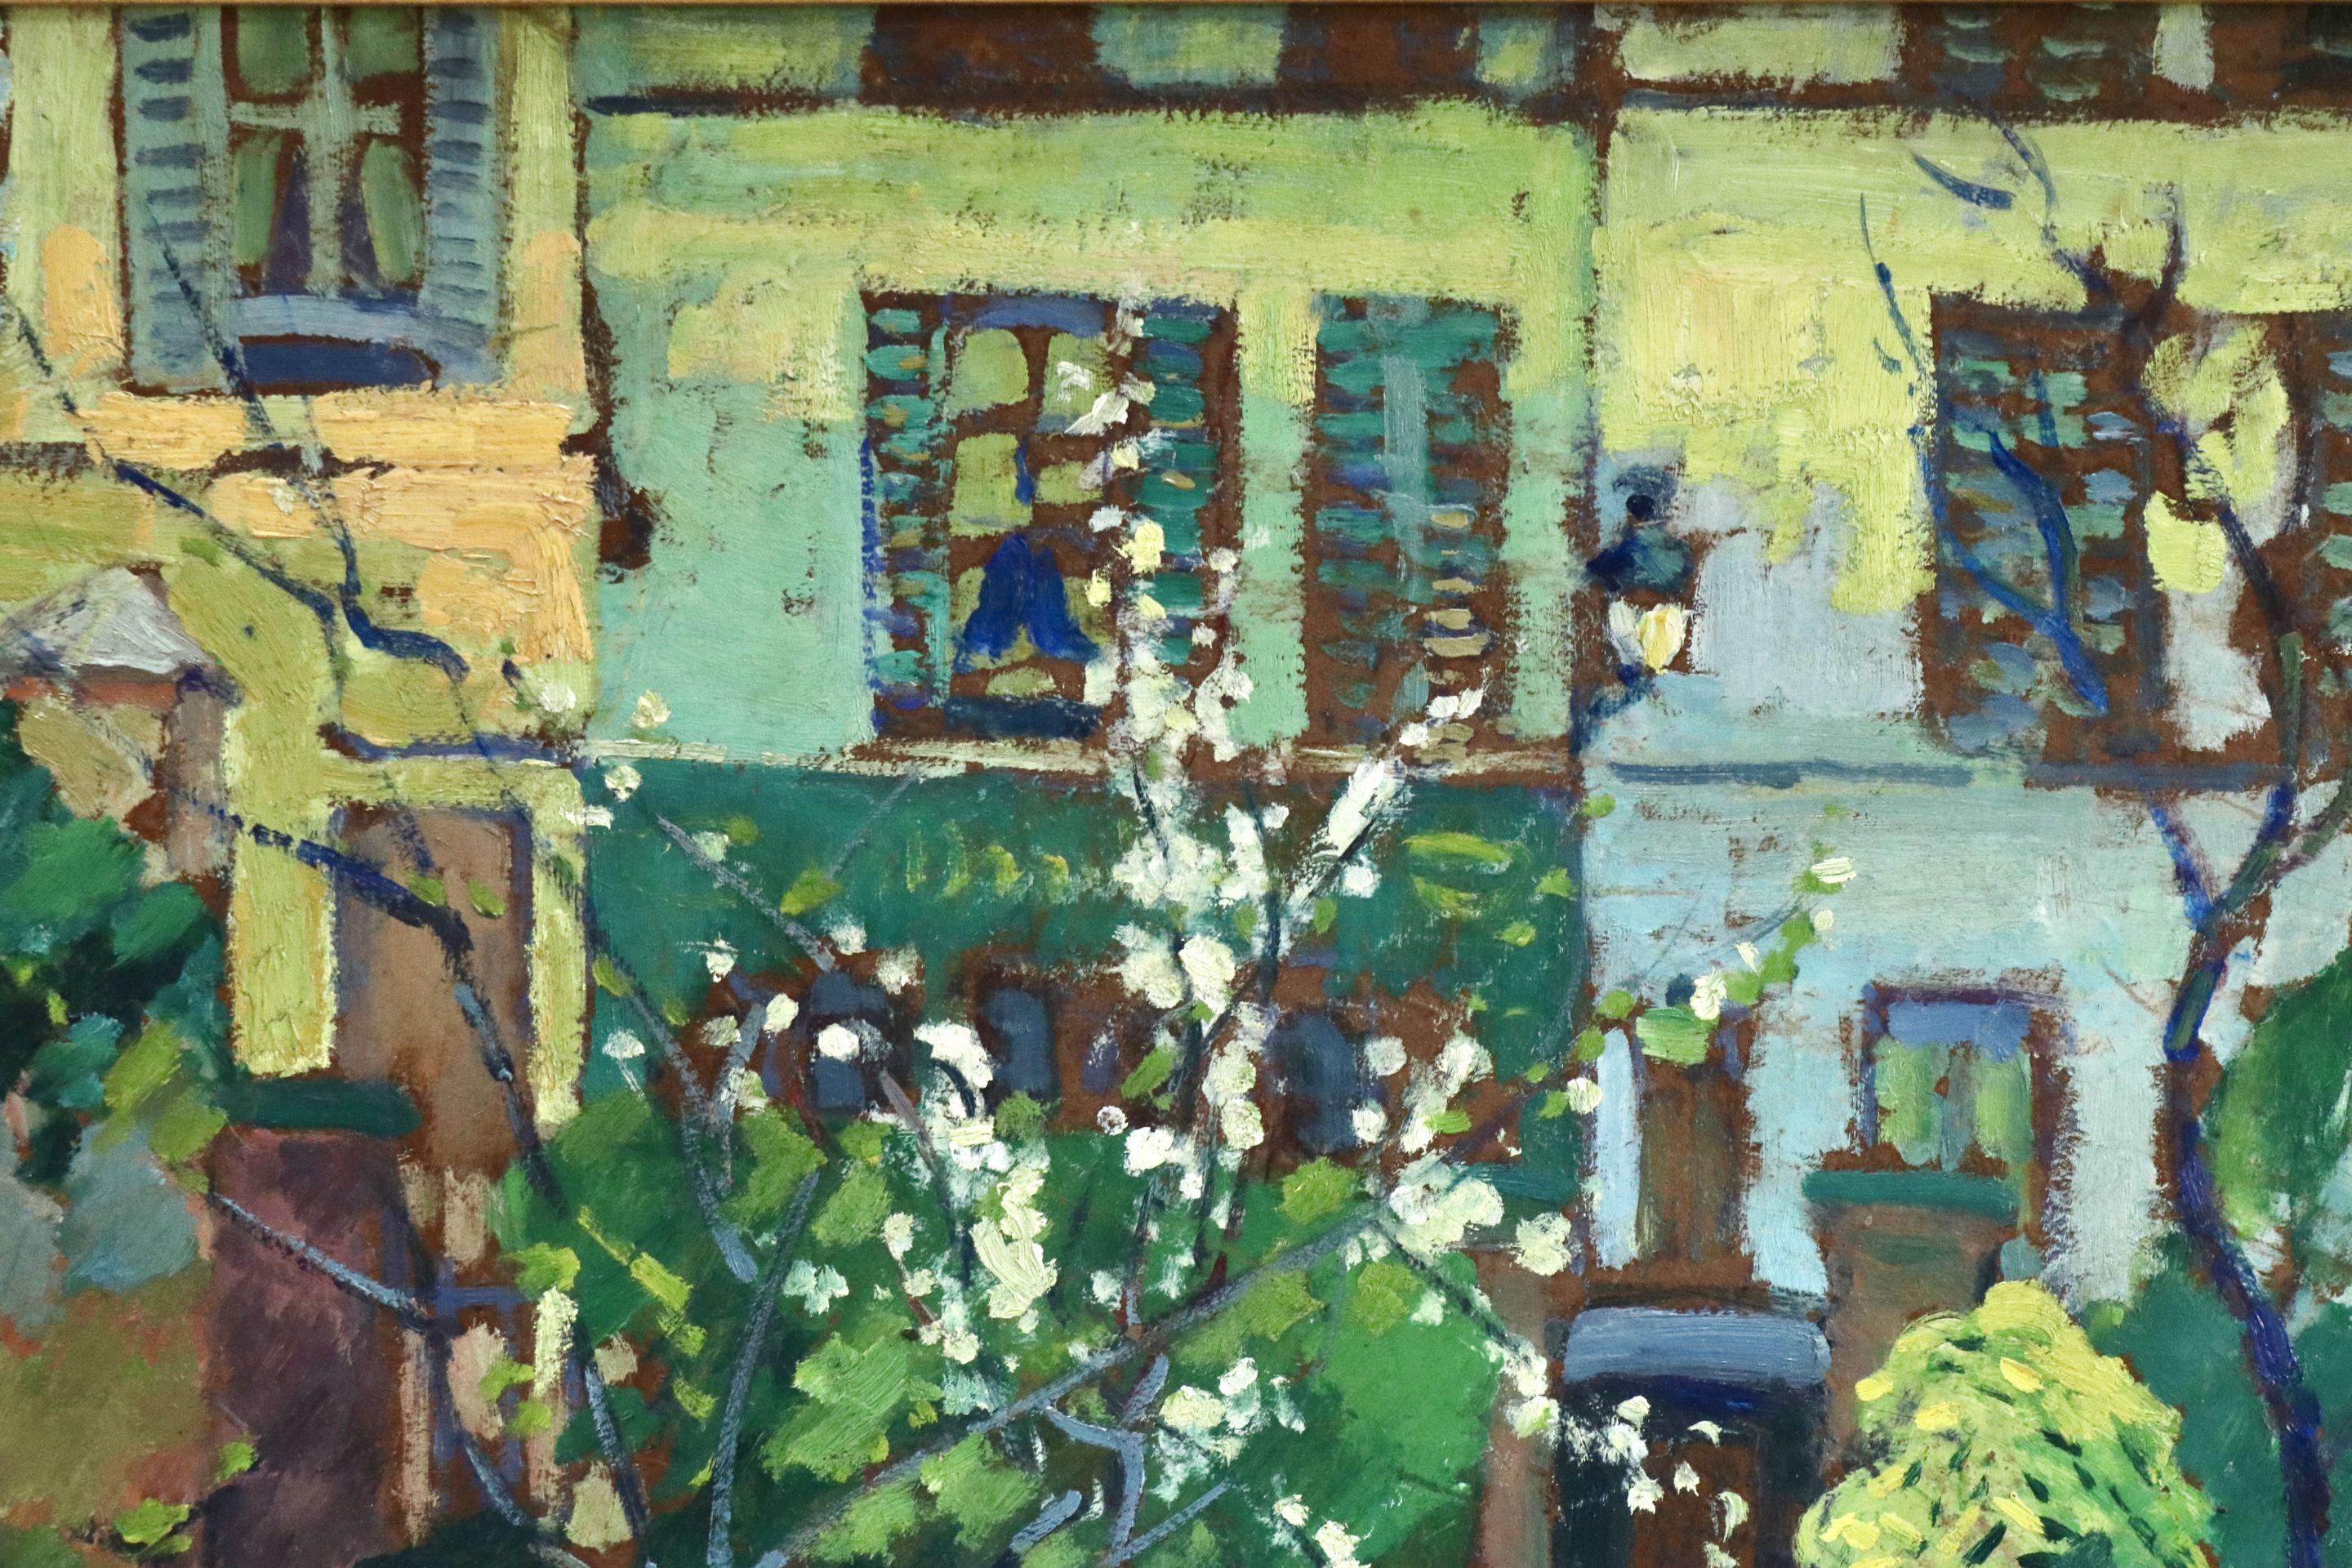 Le Jardin Fleuri - 20th Century Oil, Flowers in Garden Landscape by R A Pinchon - Post-Impressionist Painting by Robert Antoine Pinchon